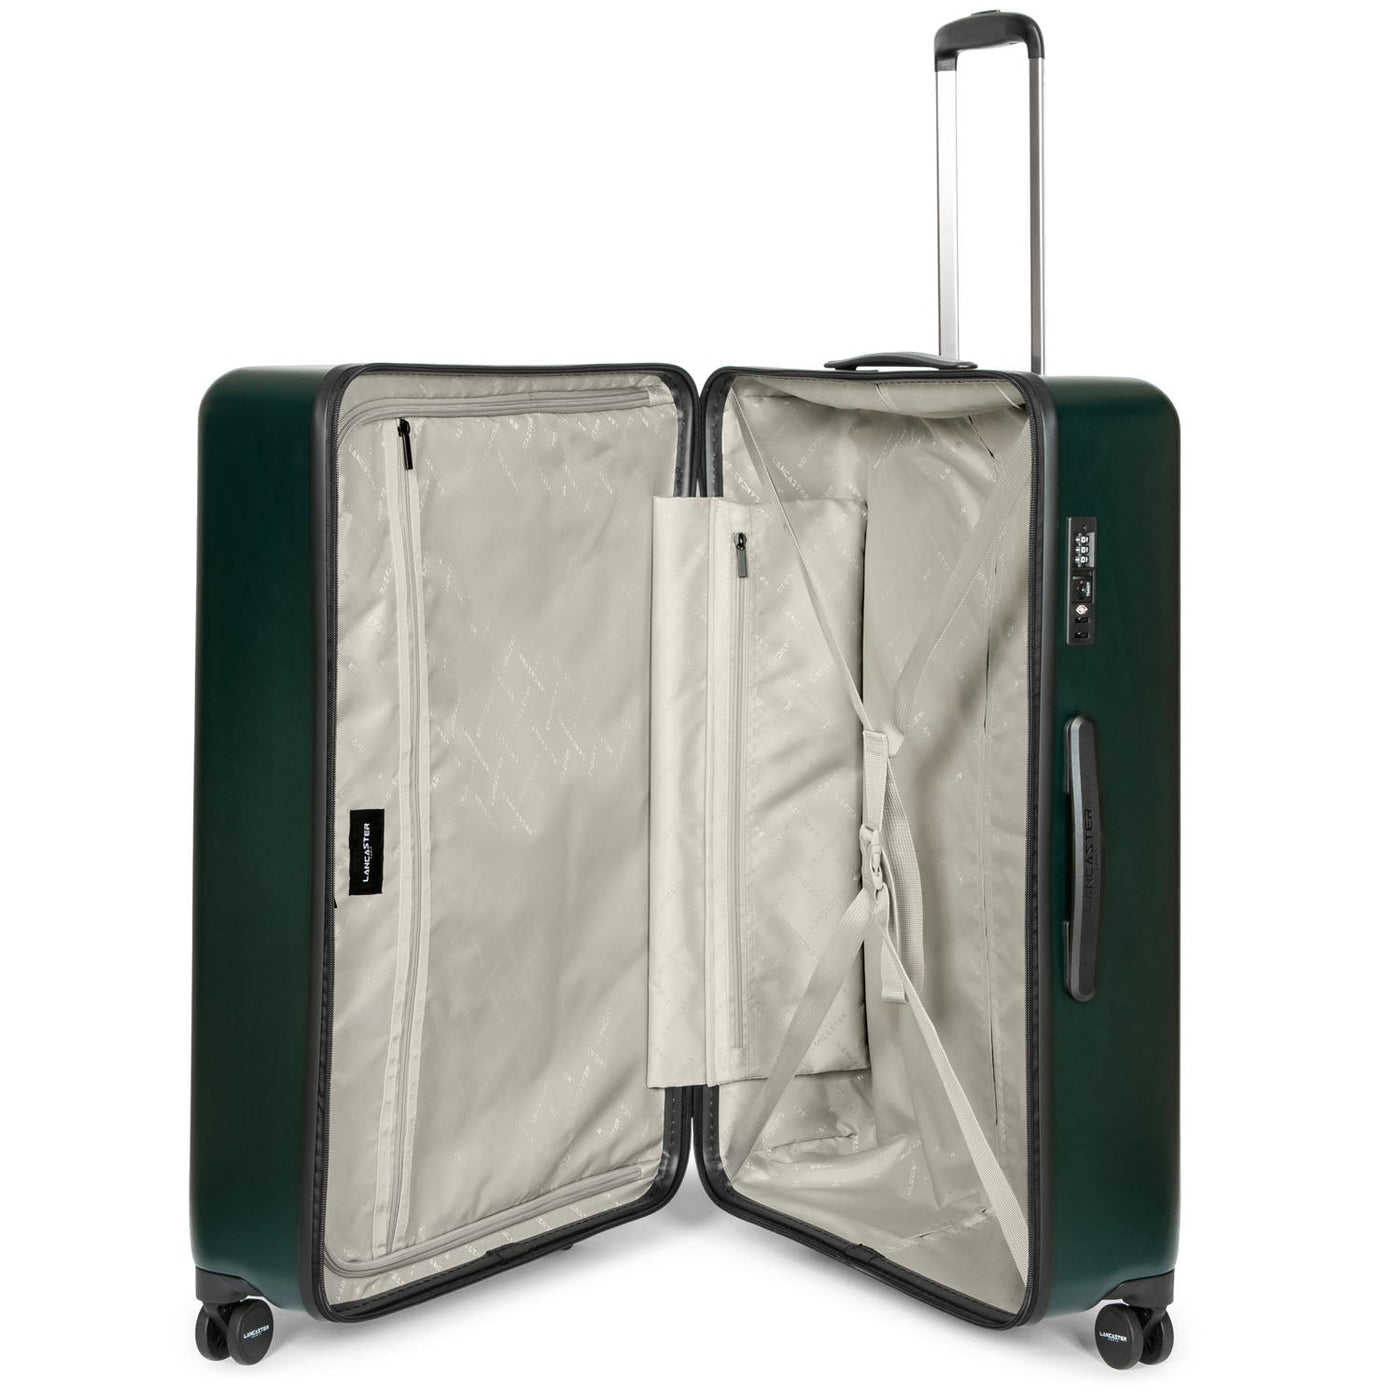 assortment of 3 luggage - luggage #couleur_vert